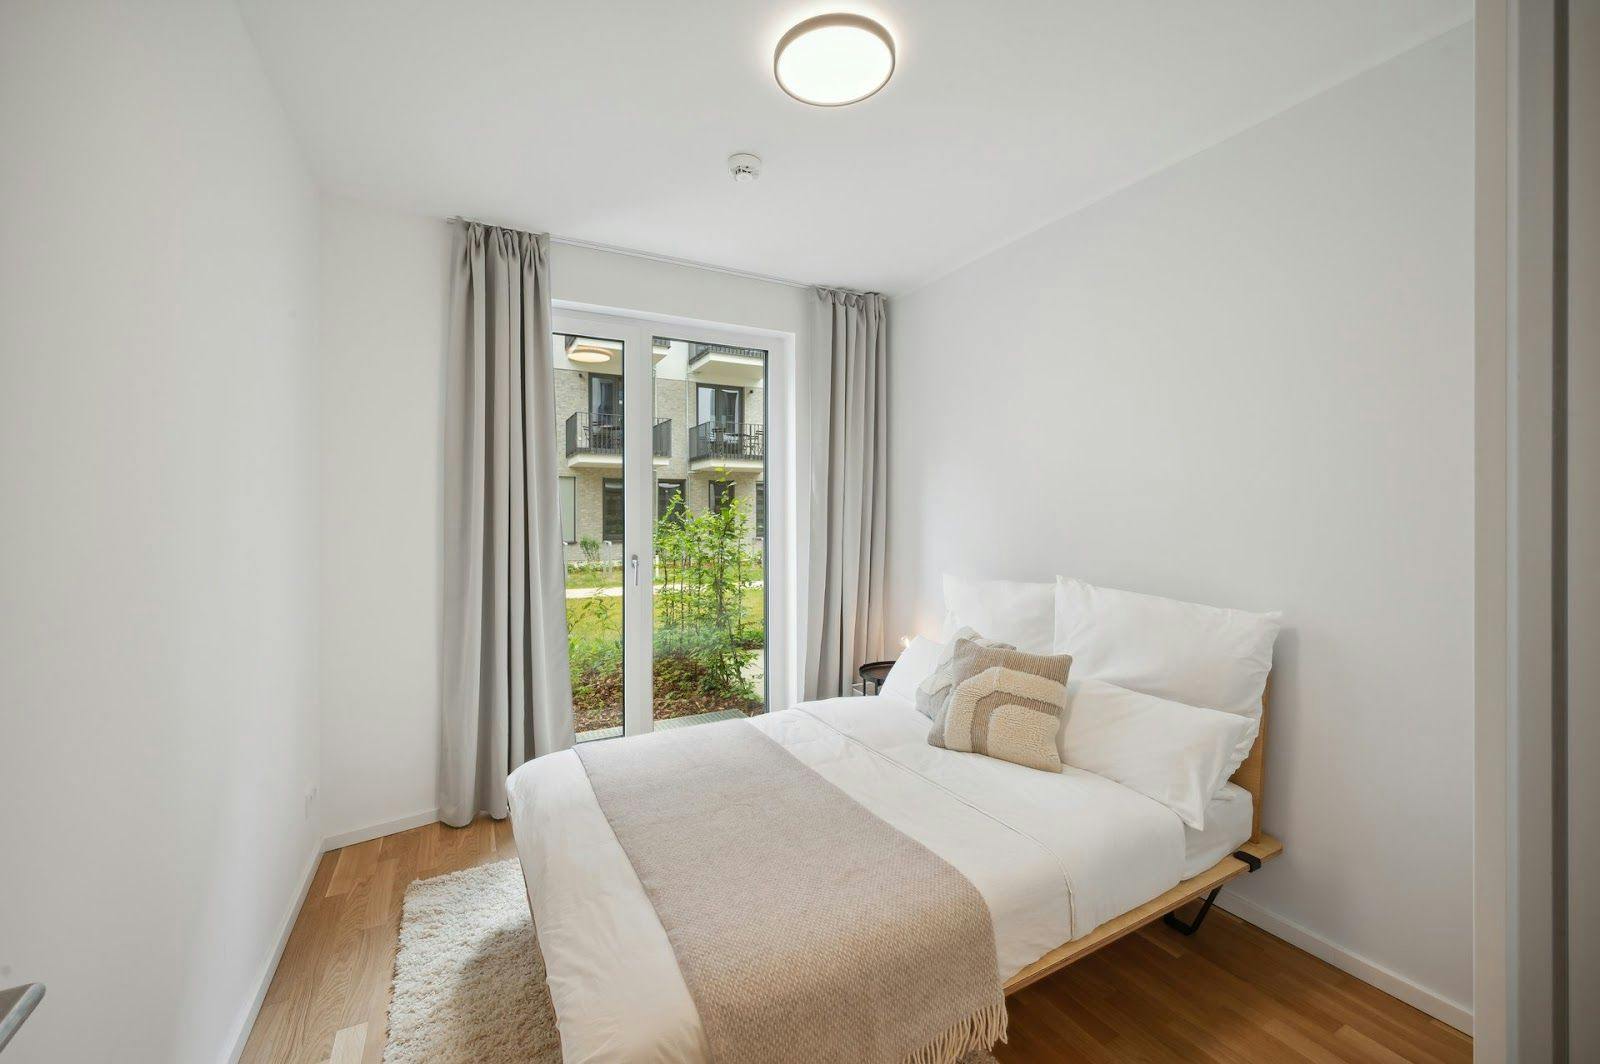 Habyt opens new building with 243 units and 2 community areas in the prestigious Berlin-Mitte